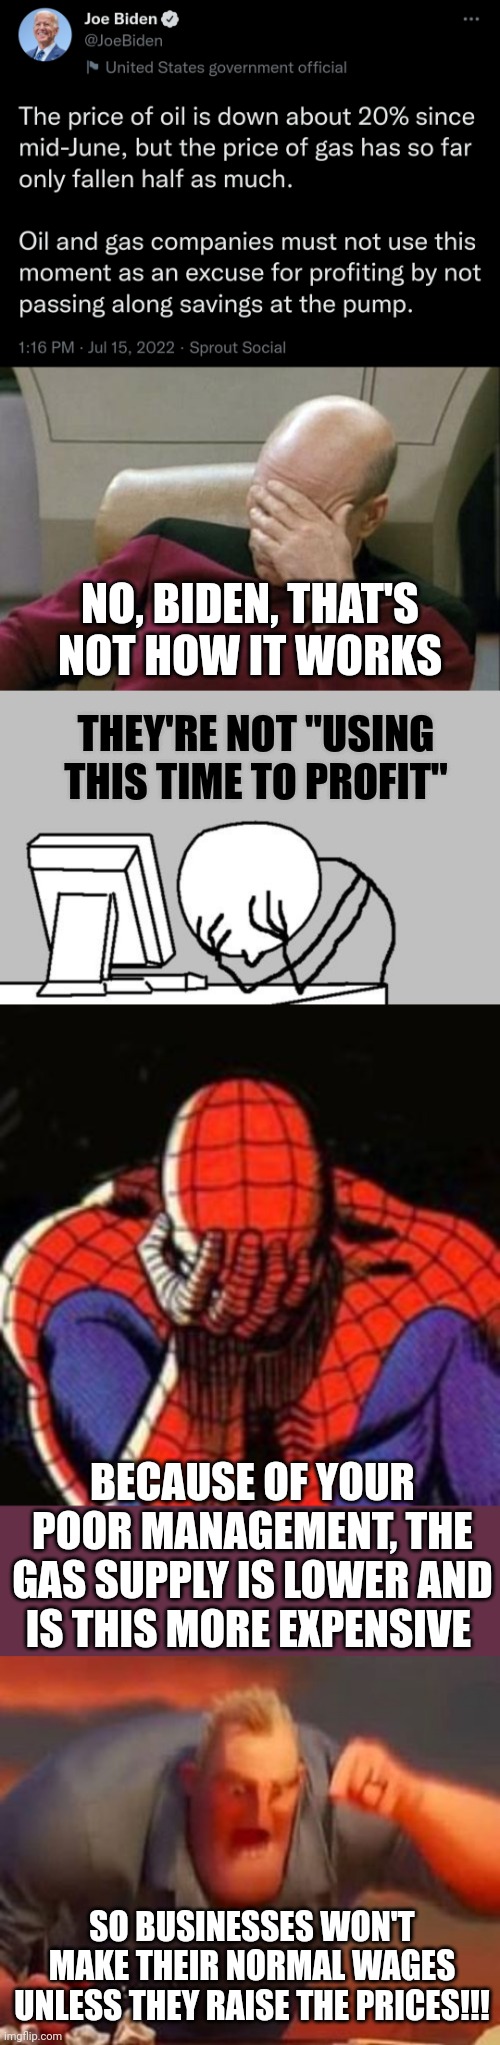 This some BS | NO, BIDEN, THAT'S NOT HOW IT WORKS; THEY'RE NOT "USING THIS TIME TO PROFIT"; BECAUSE OF YOUR POOR MANAGEMENT, THE GAS SUPPLY IS LOWER AND IS THIS MORE EXPENSIVE; SO BUSINESSES WON'T MAKE THEIR NORMAL WAGES UNLESS THEY RAISE THE PRICES!!! | image tagged in memes,captain picard facepalm,computer guy facepalm,sad spiderman,mr incredible mad,politics | made w/ Imgflip meme maker